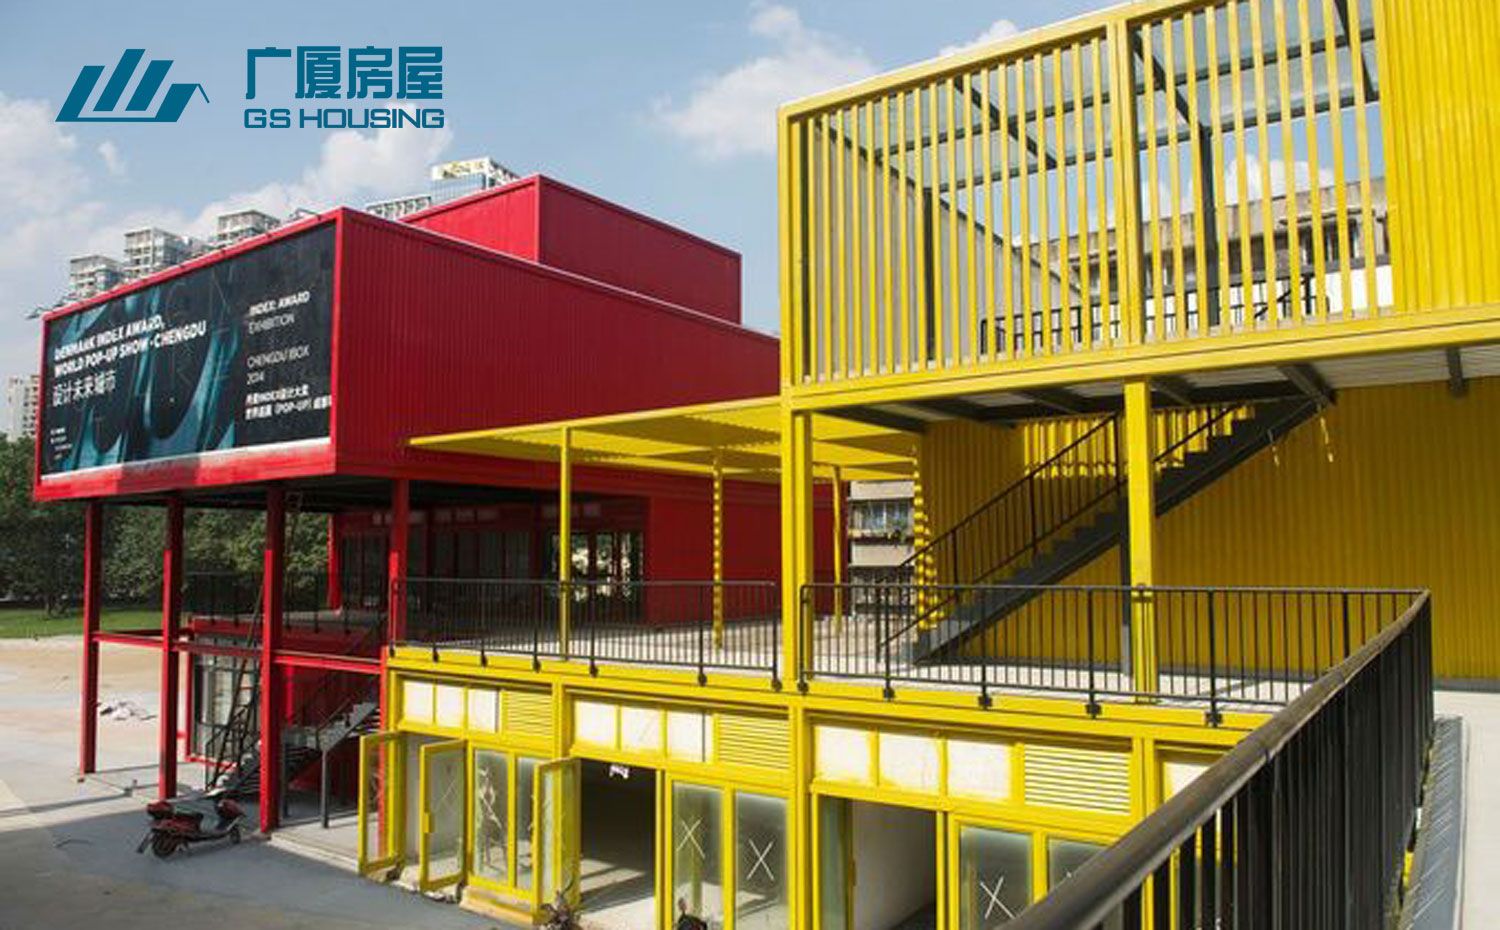 fabricated building, fabricated house,ready made house, modular house, fabricated houses, prefabricated container house